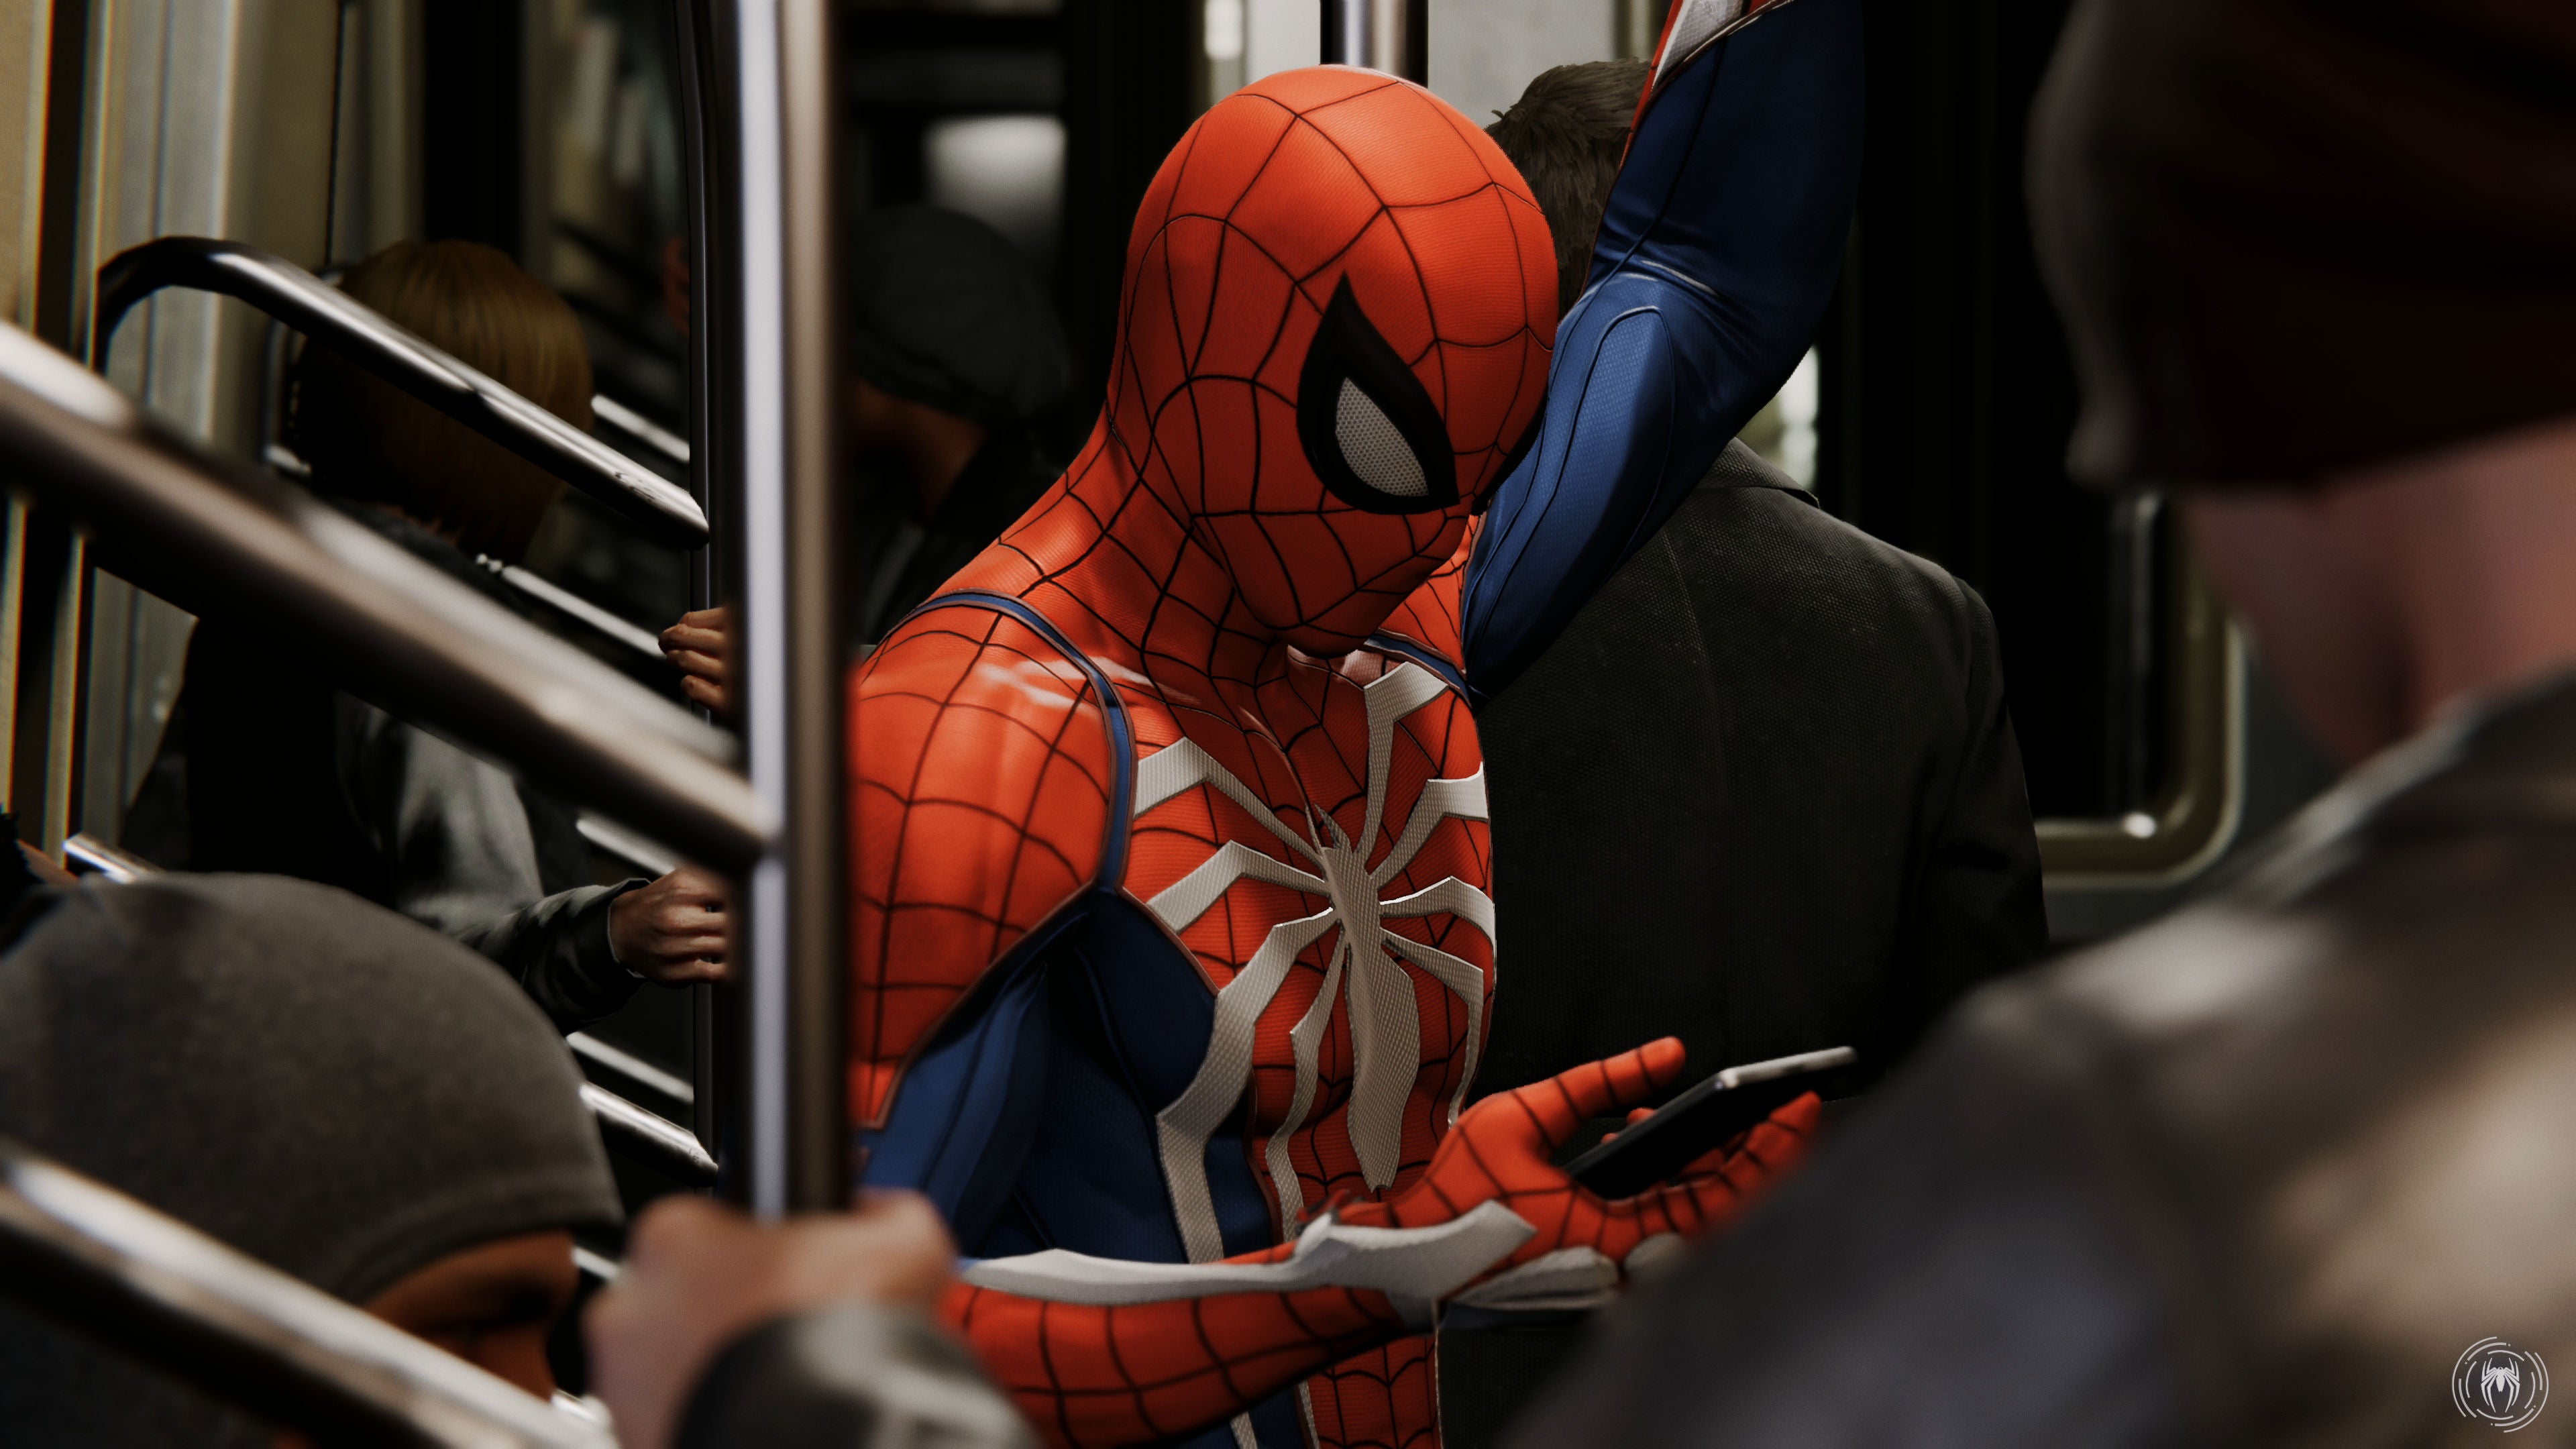 Spider-Man PS4: tips and tricks for mission | VG247